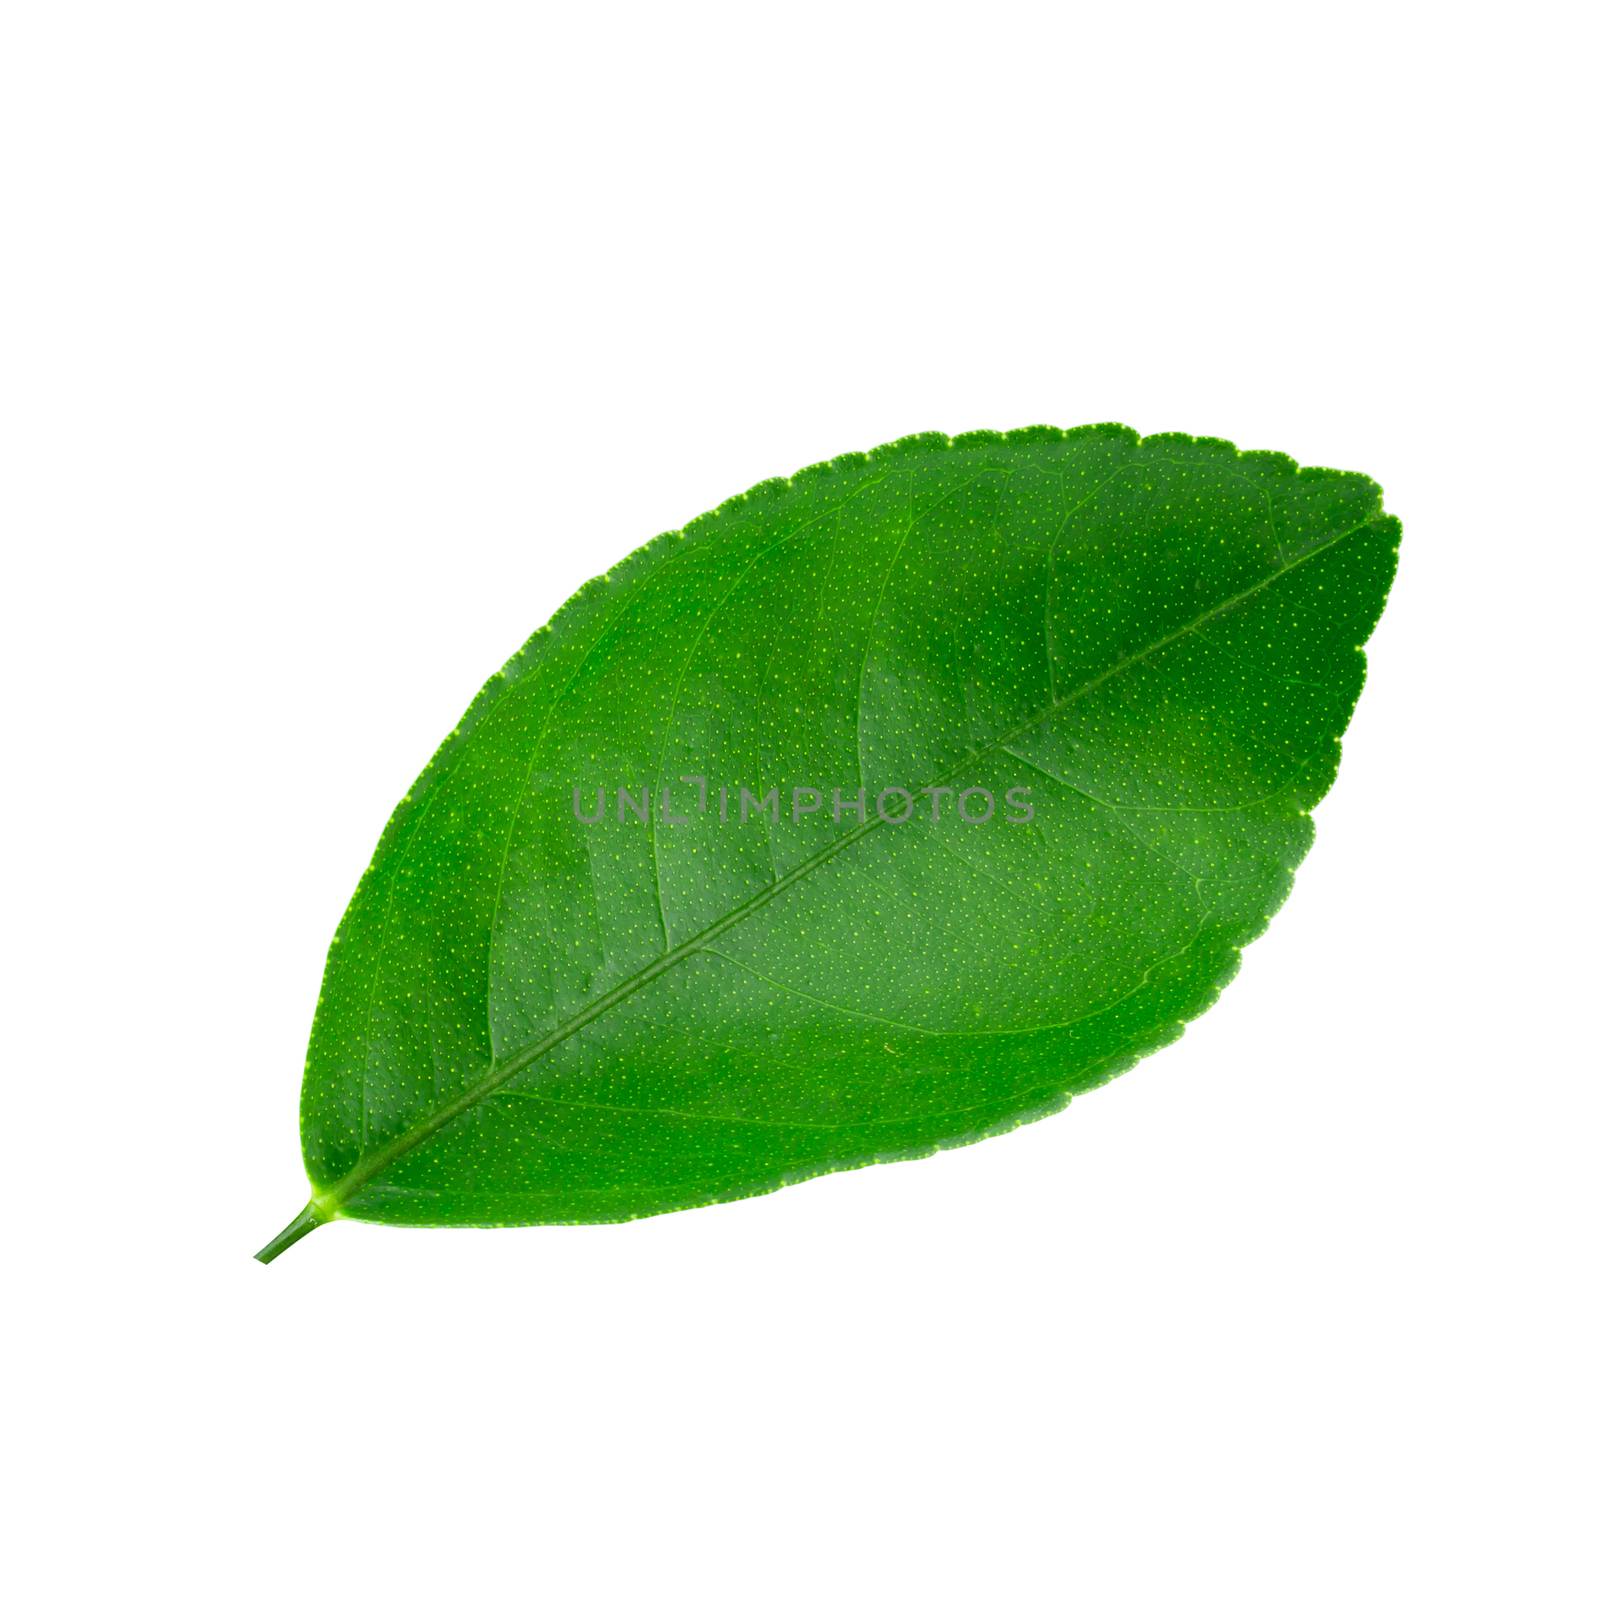 Citrus leaves isolated on a white background by kaiskynet